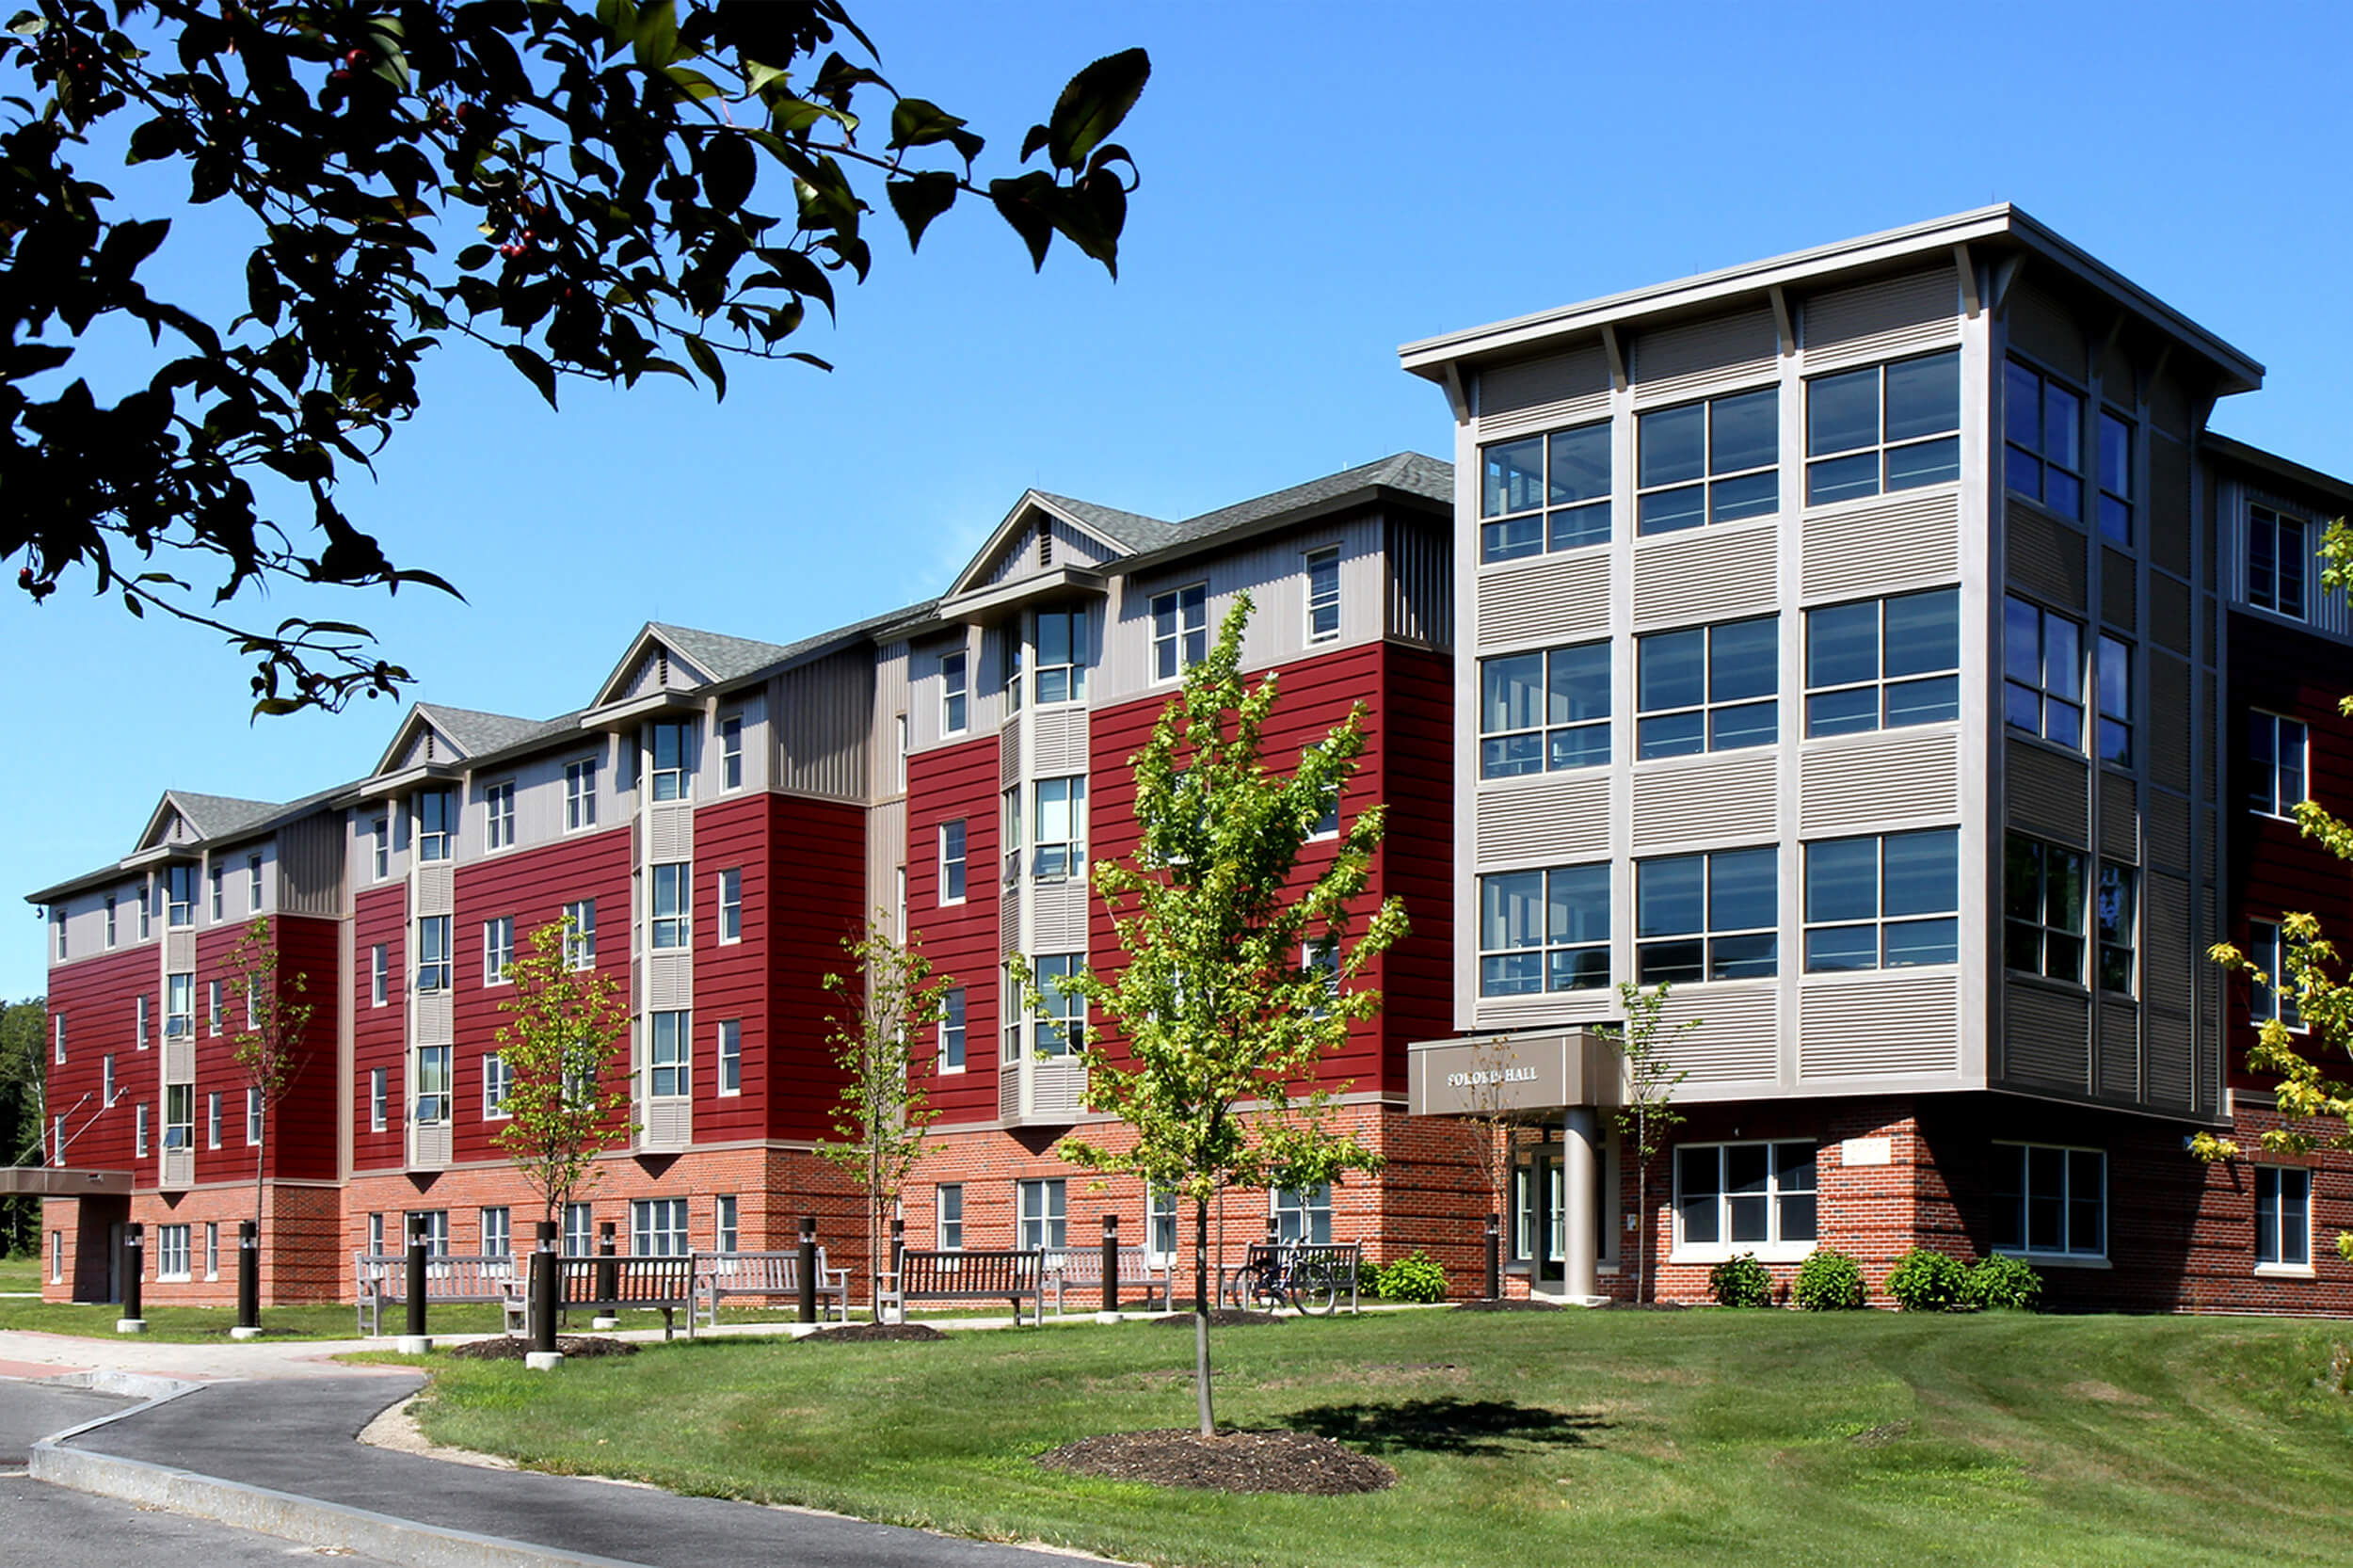 Exterior view of a college campus dorm building. The building facade features red and grey siding with brick along the bottom floor. A lawn with some planted trees are in front of the building.